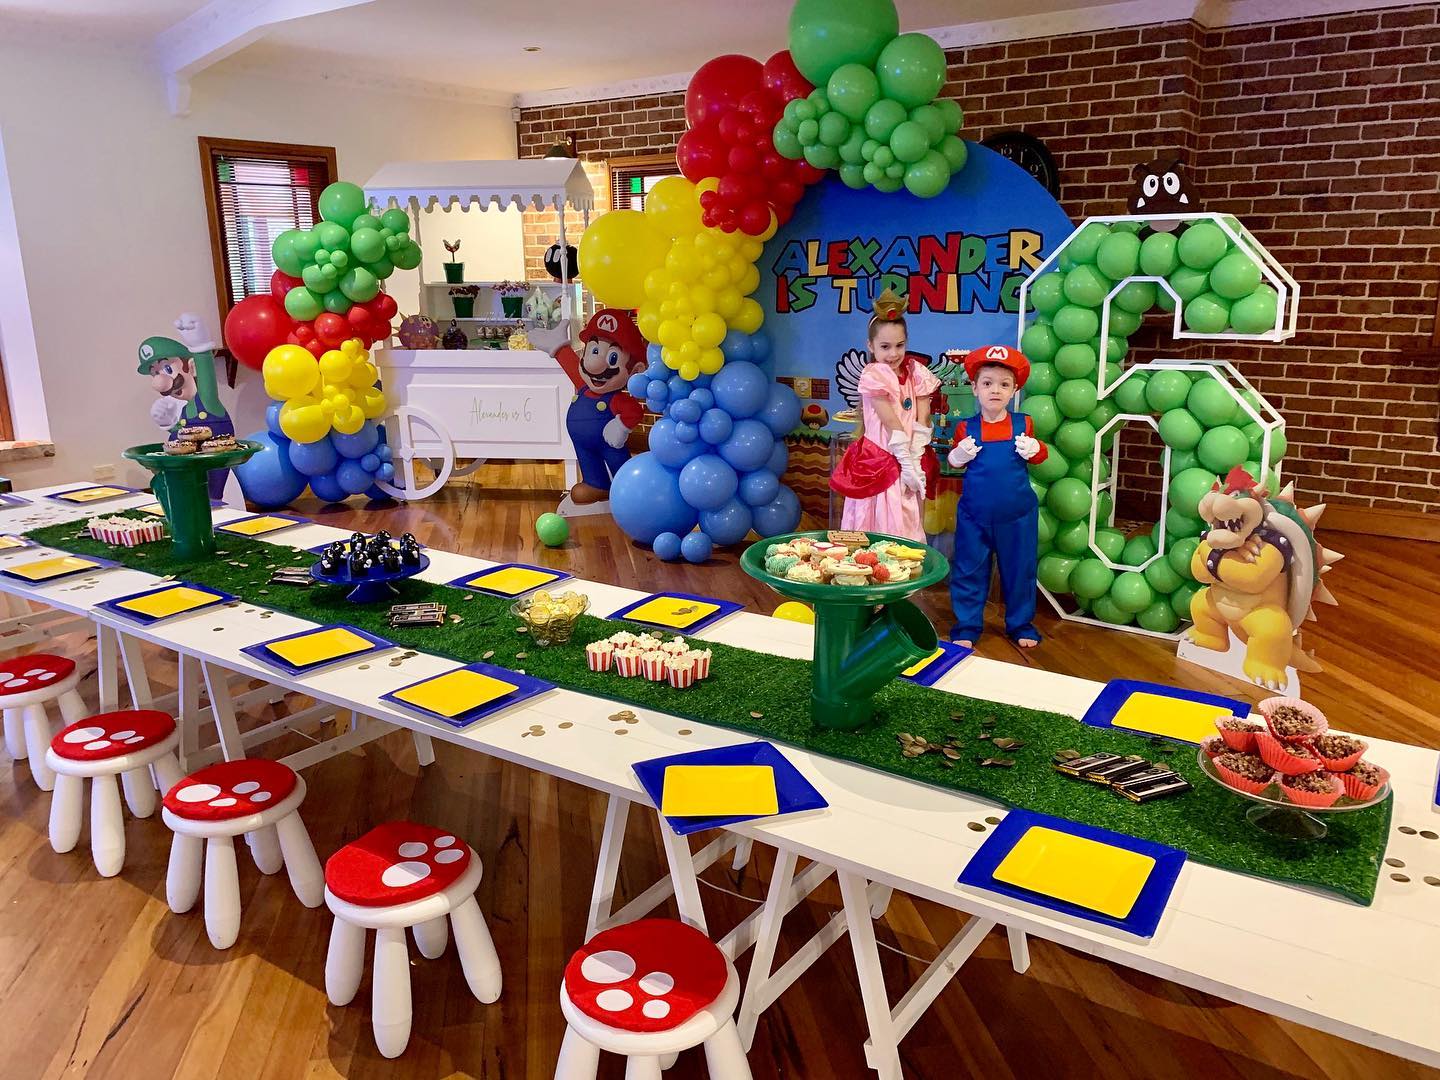 Noble Outdated Personification Super Mario Party theme party supplies and ideas! - Lifes Little Celebration